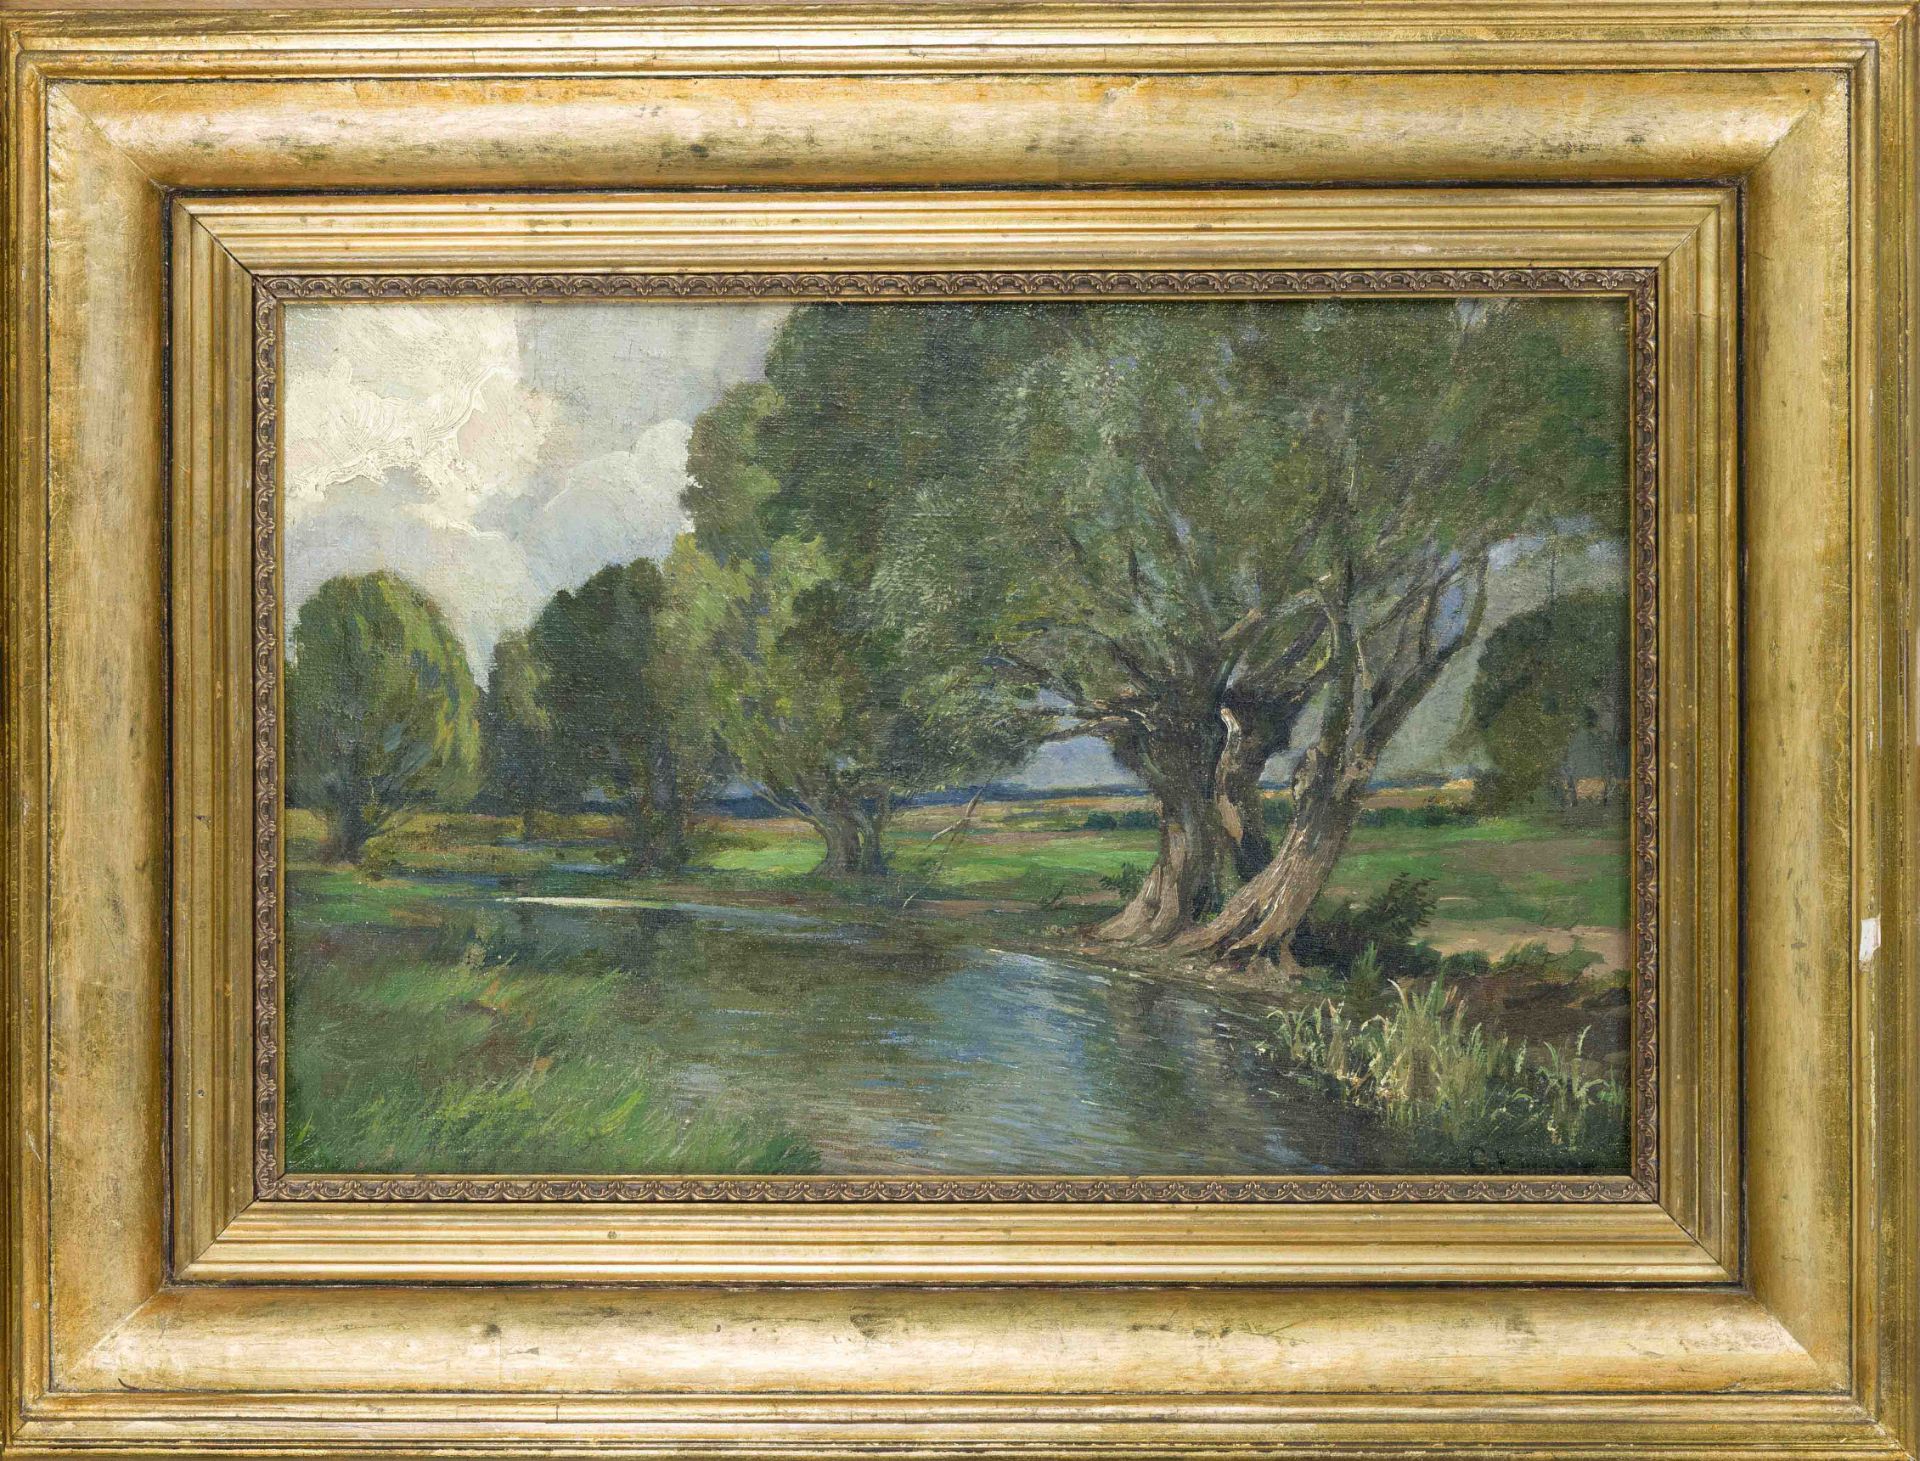 C. Lingner, German painter around 1900, Landscape with willows on a stream bank, oil on cardboard,